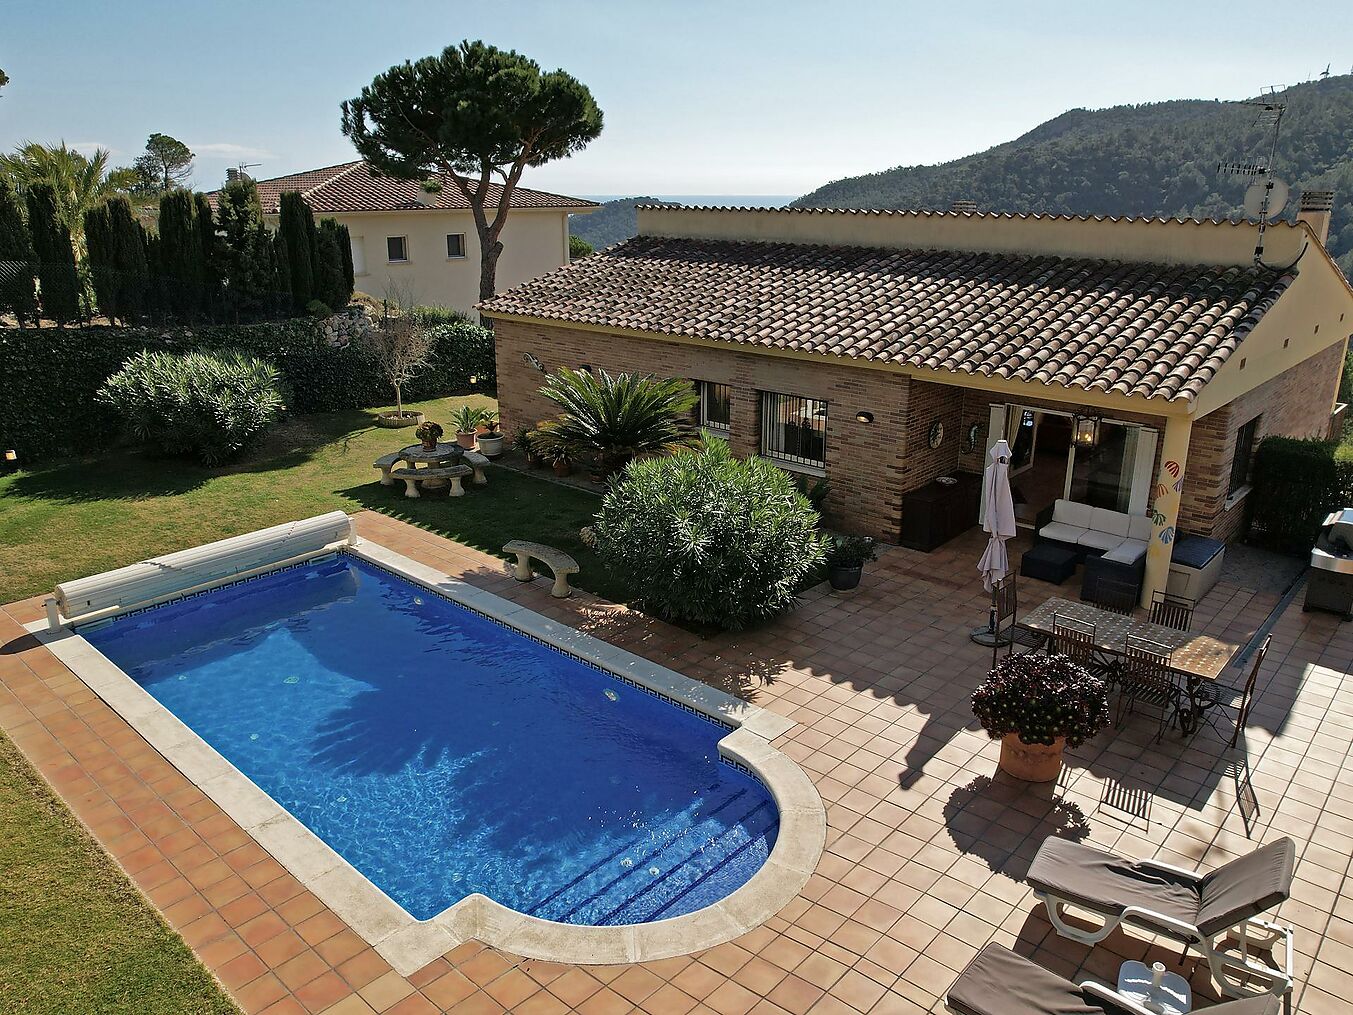 Villa with impressive views towards mountains and sea